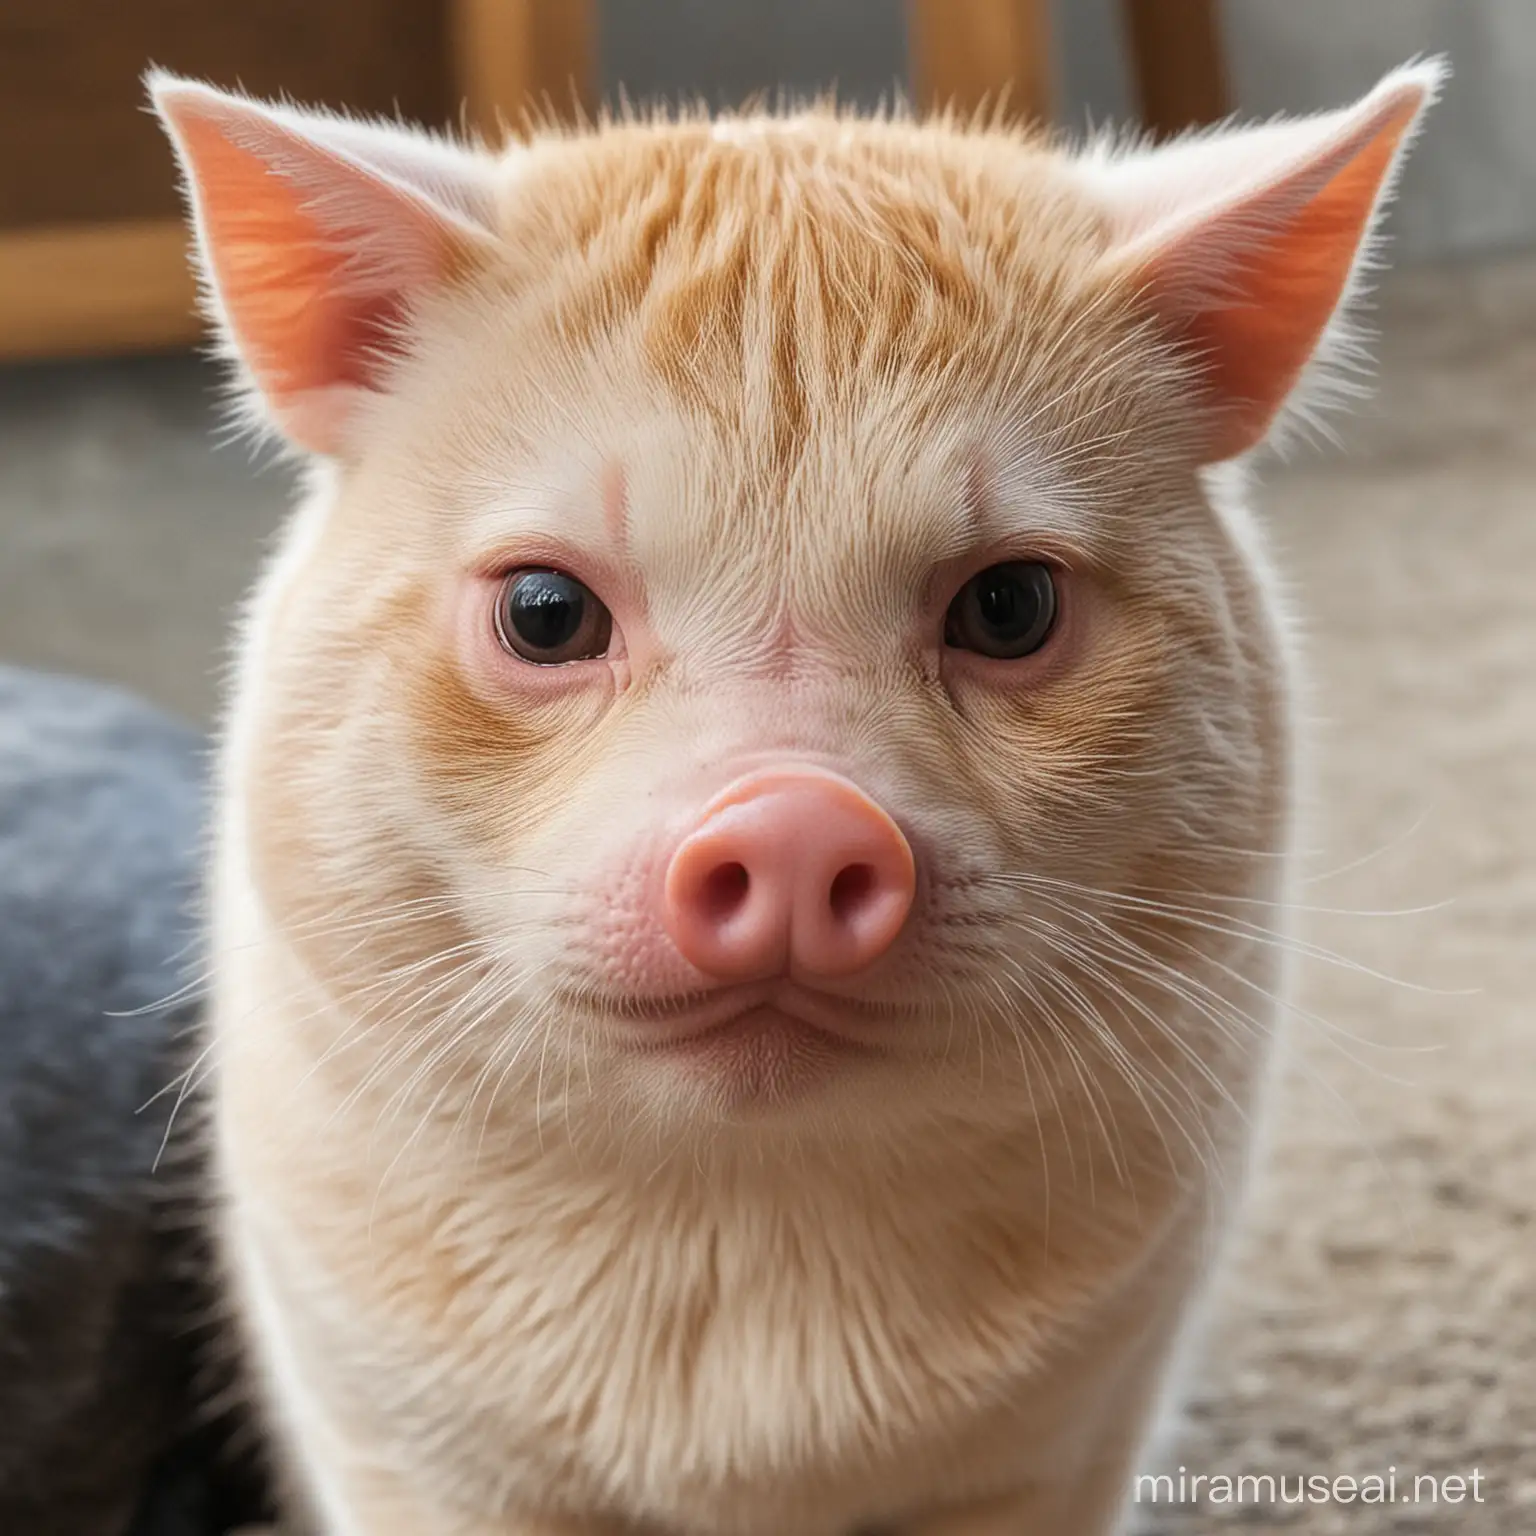 cat with pig face
